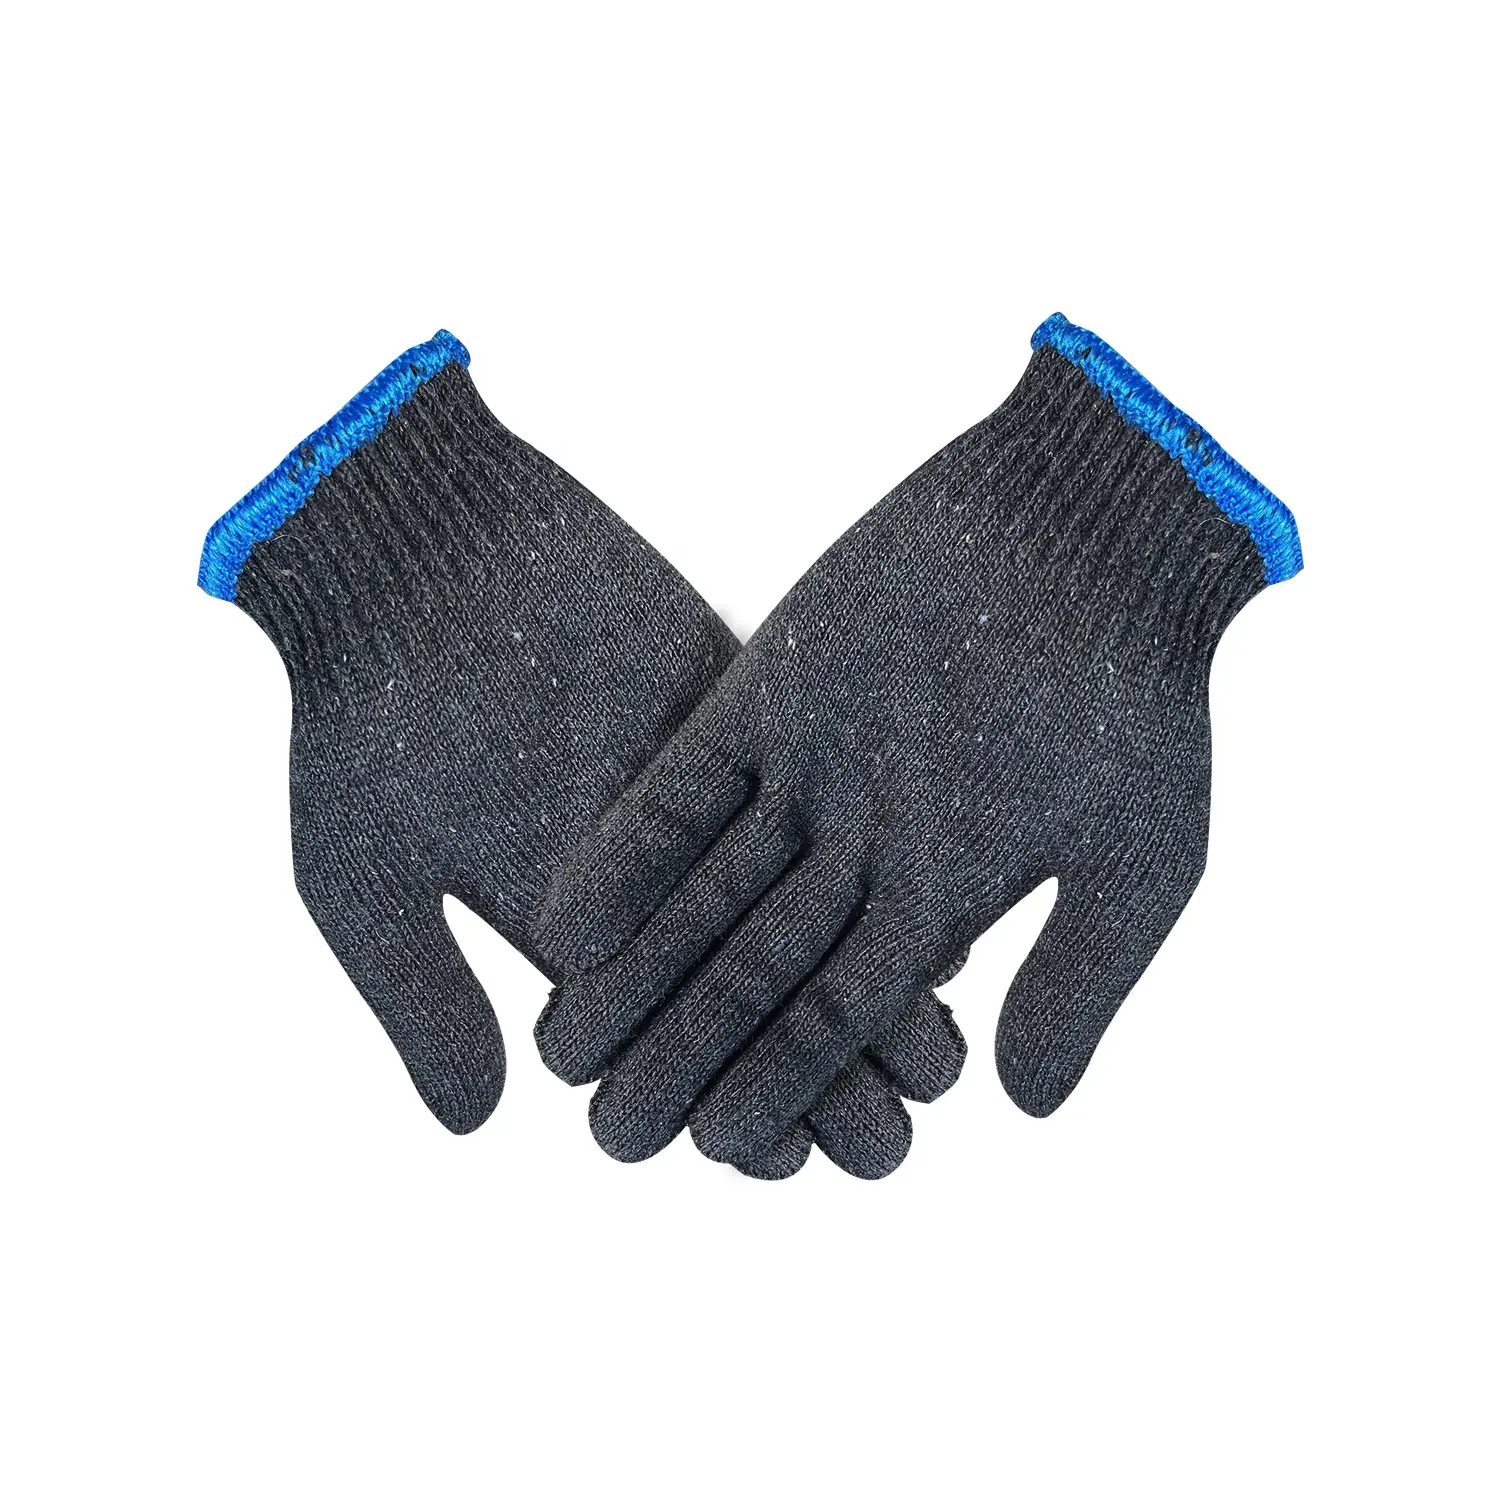 Black Cotton Yarn Knitted Gloves Construction Hand Thickening Industrial Gardening Knitted Cotton Gloves